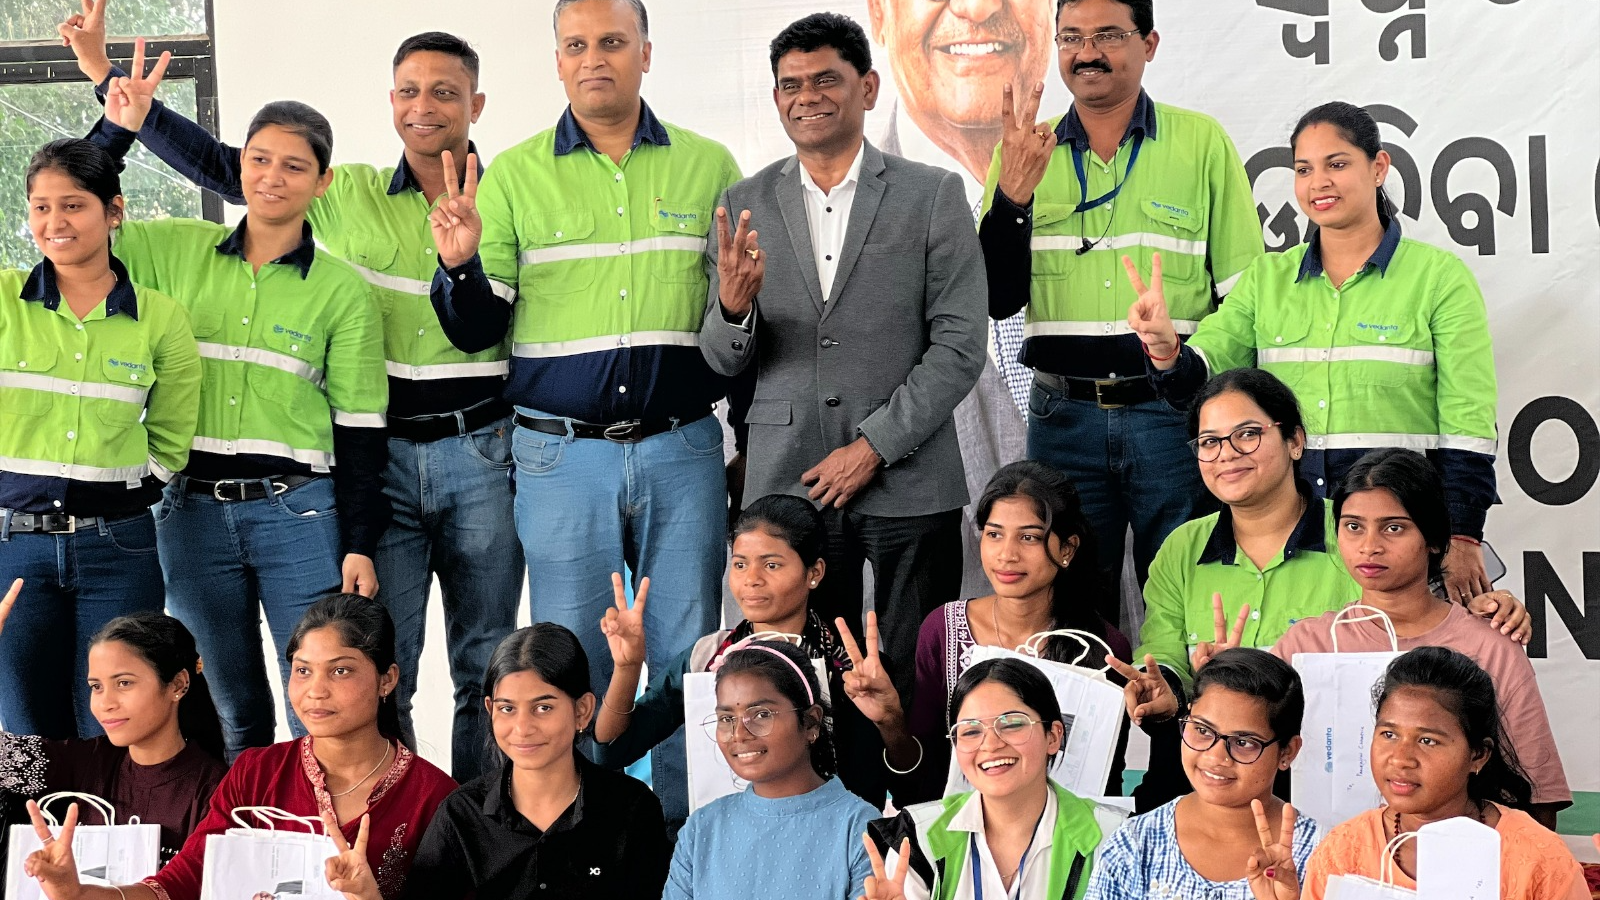 Vedanta launches 2nd phase of its unique recruitment drive 'Project Panchi'